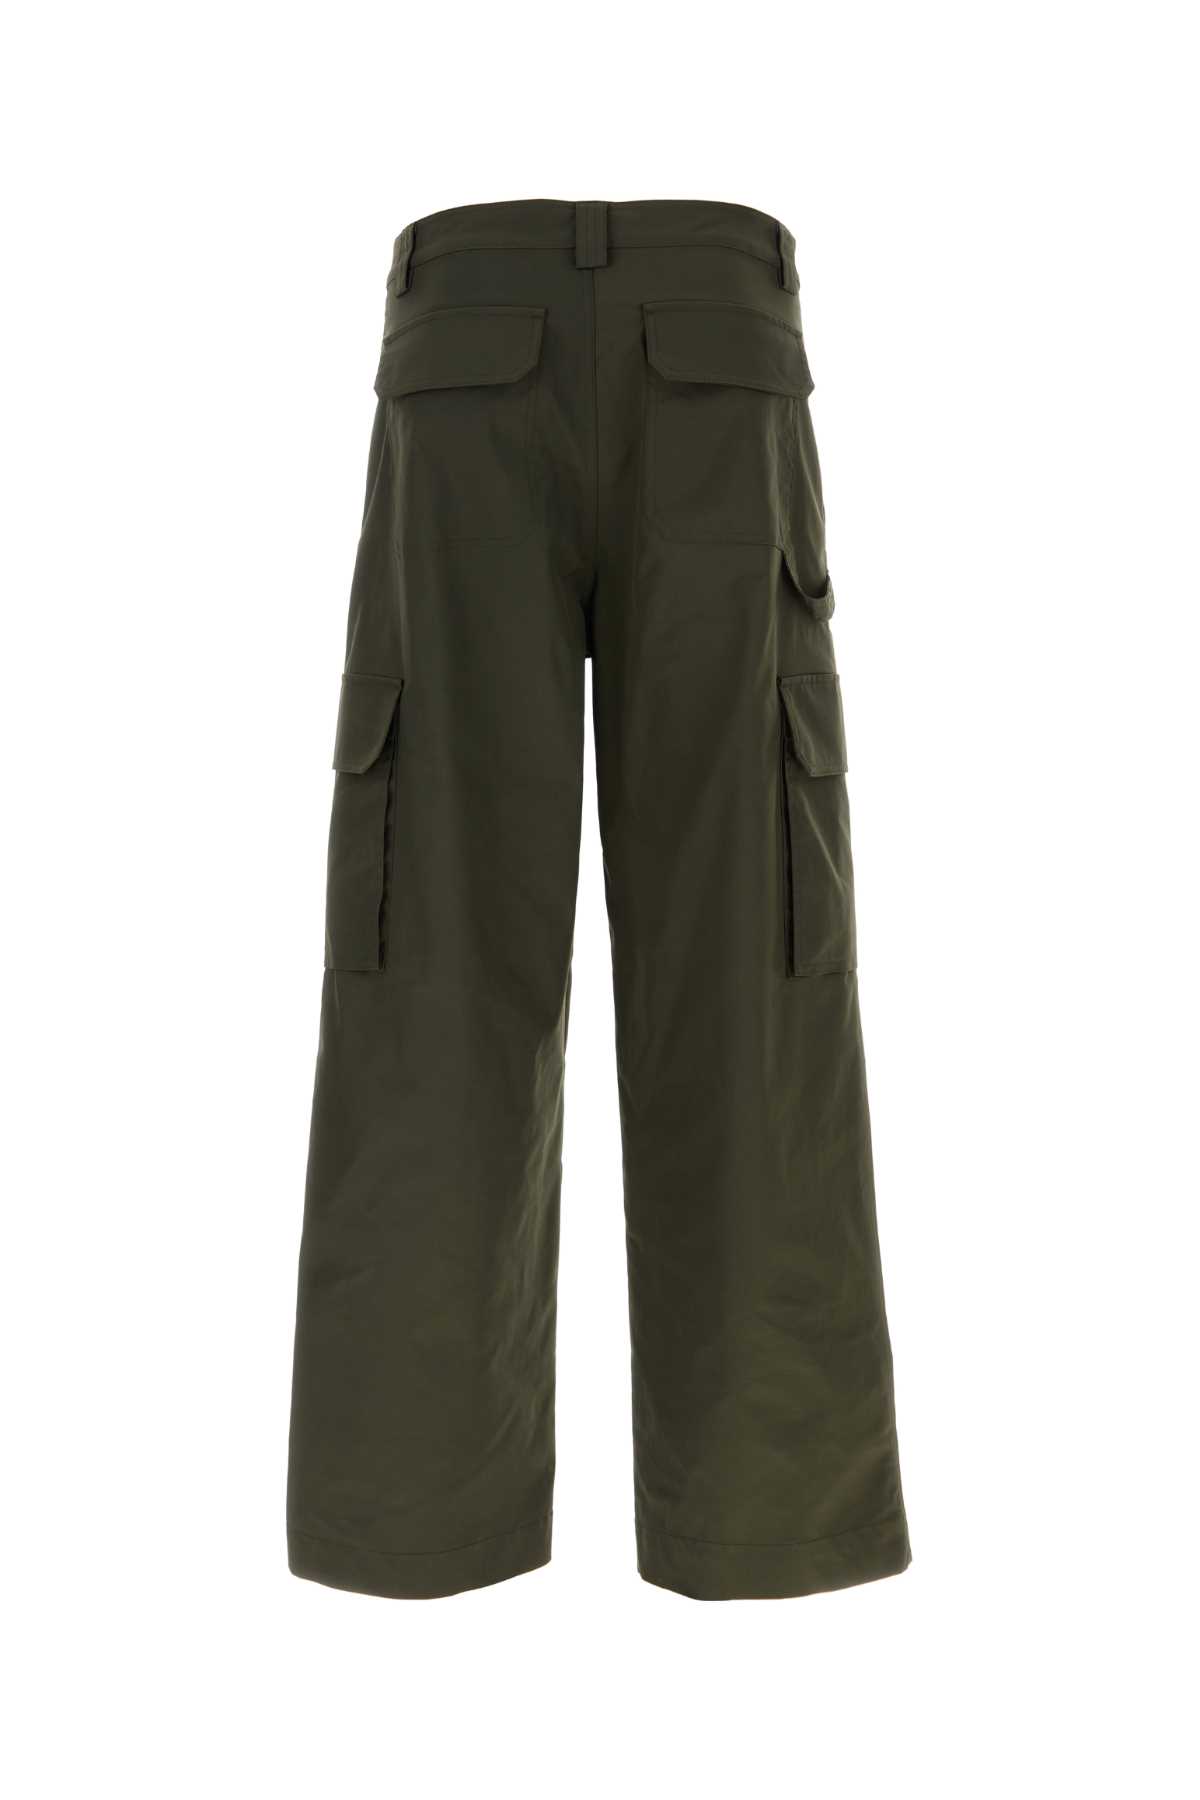 Shop Valentino Olive Green Polyester Blend Cargo Pant